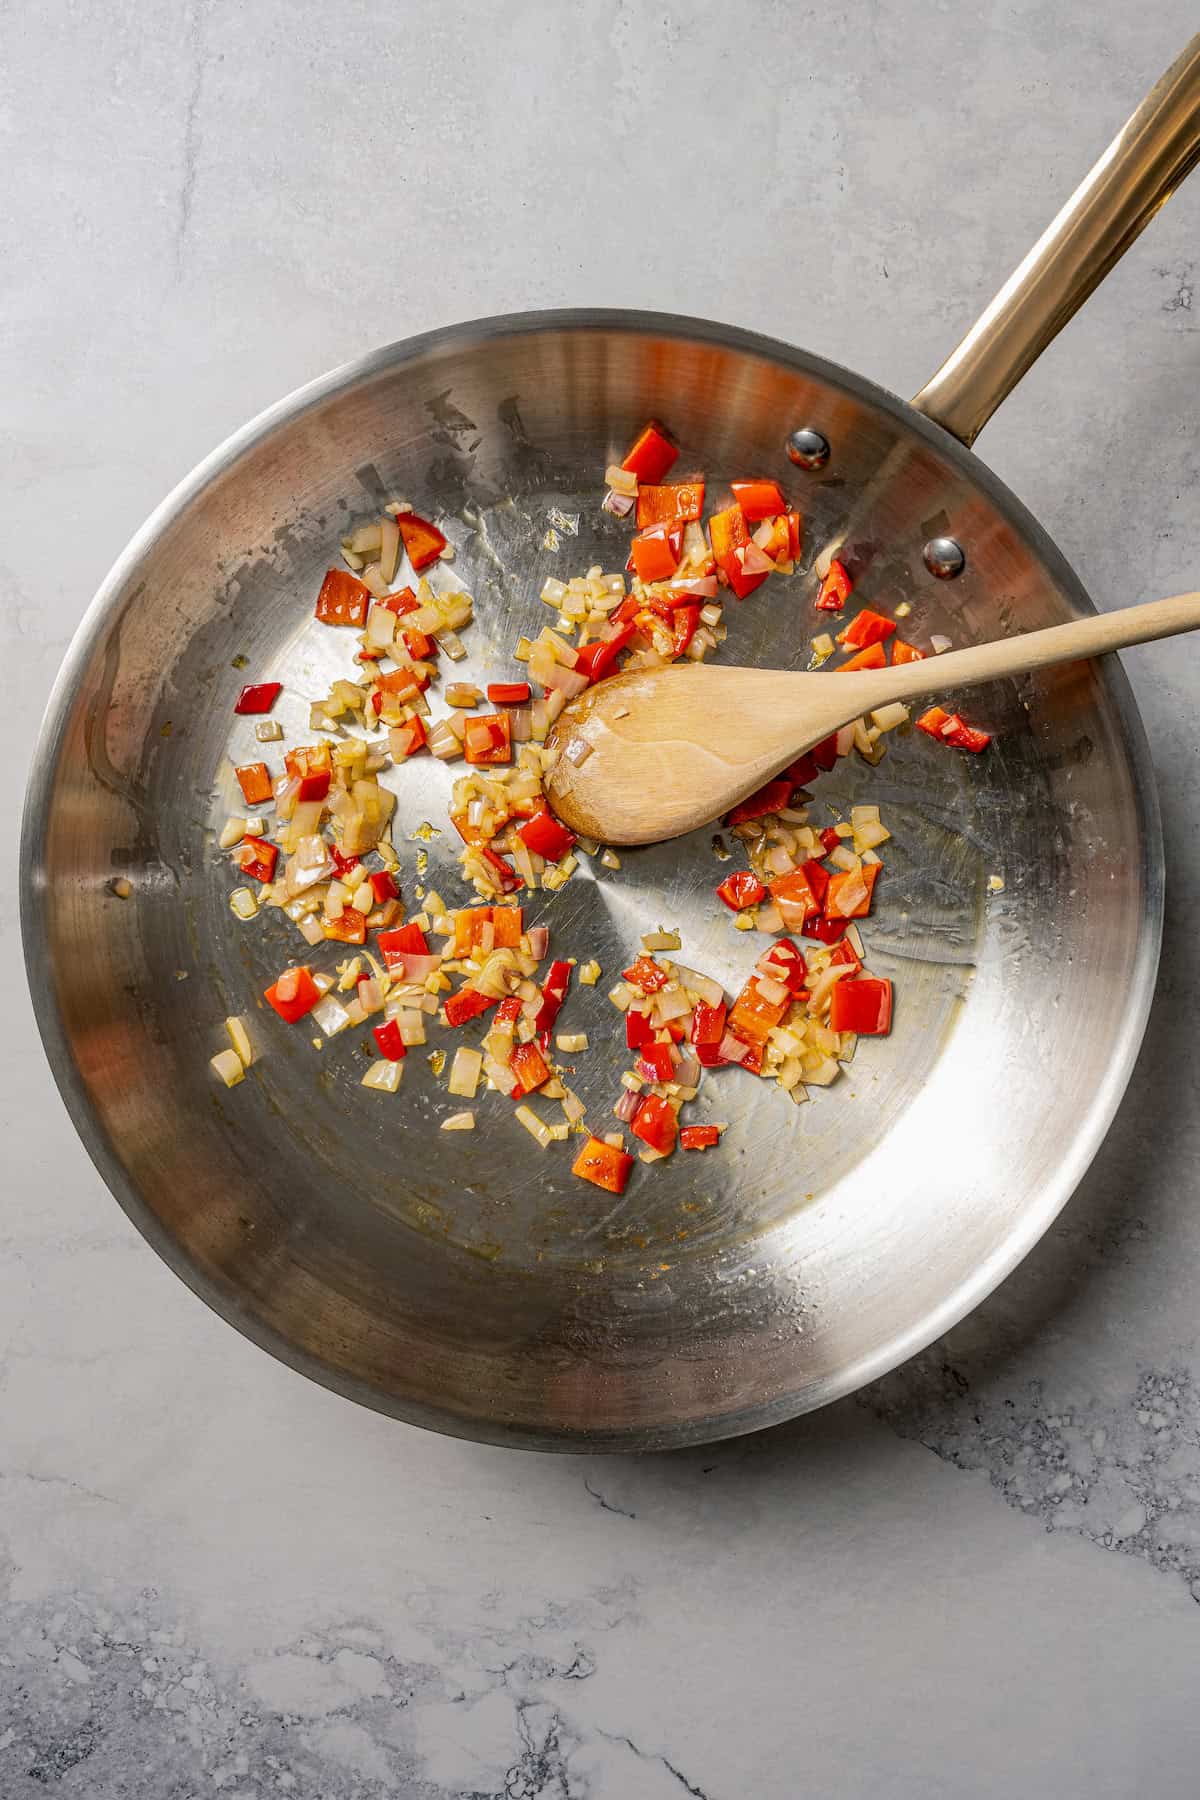 Diced red bell peppers and onion sautéing in a skillet with a wooden spoon.